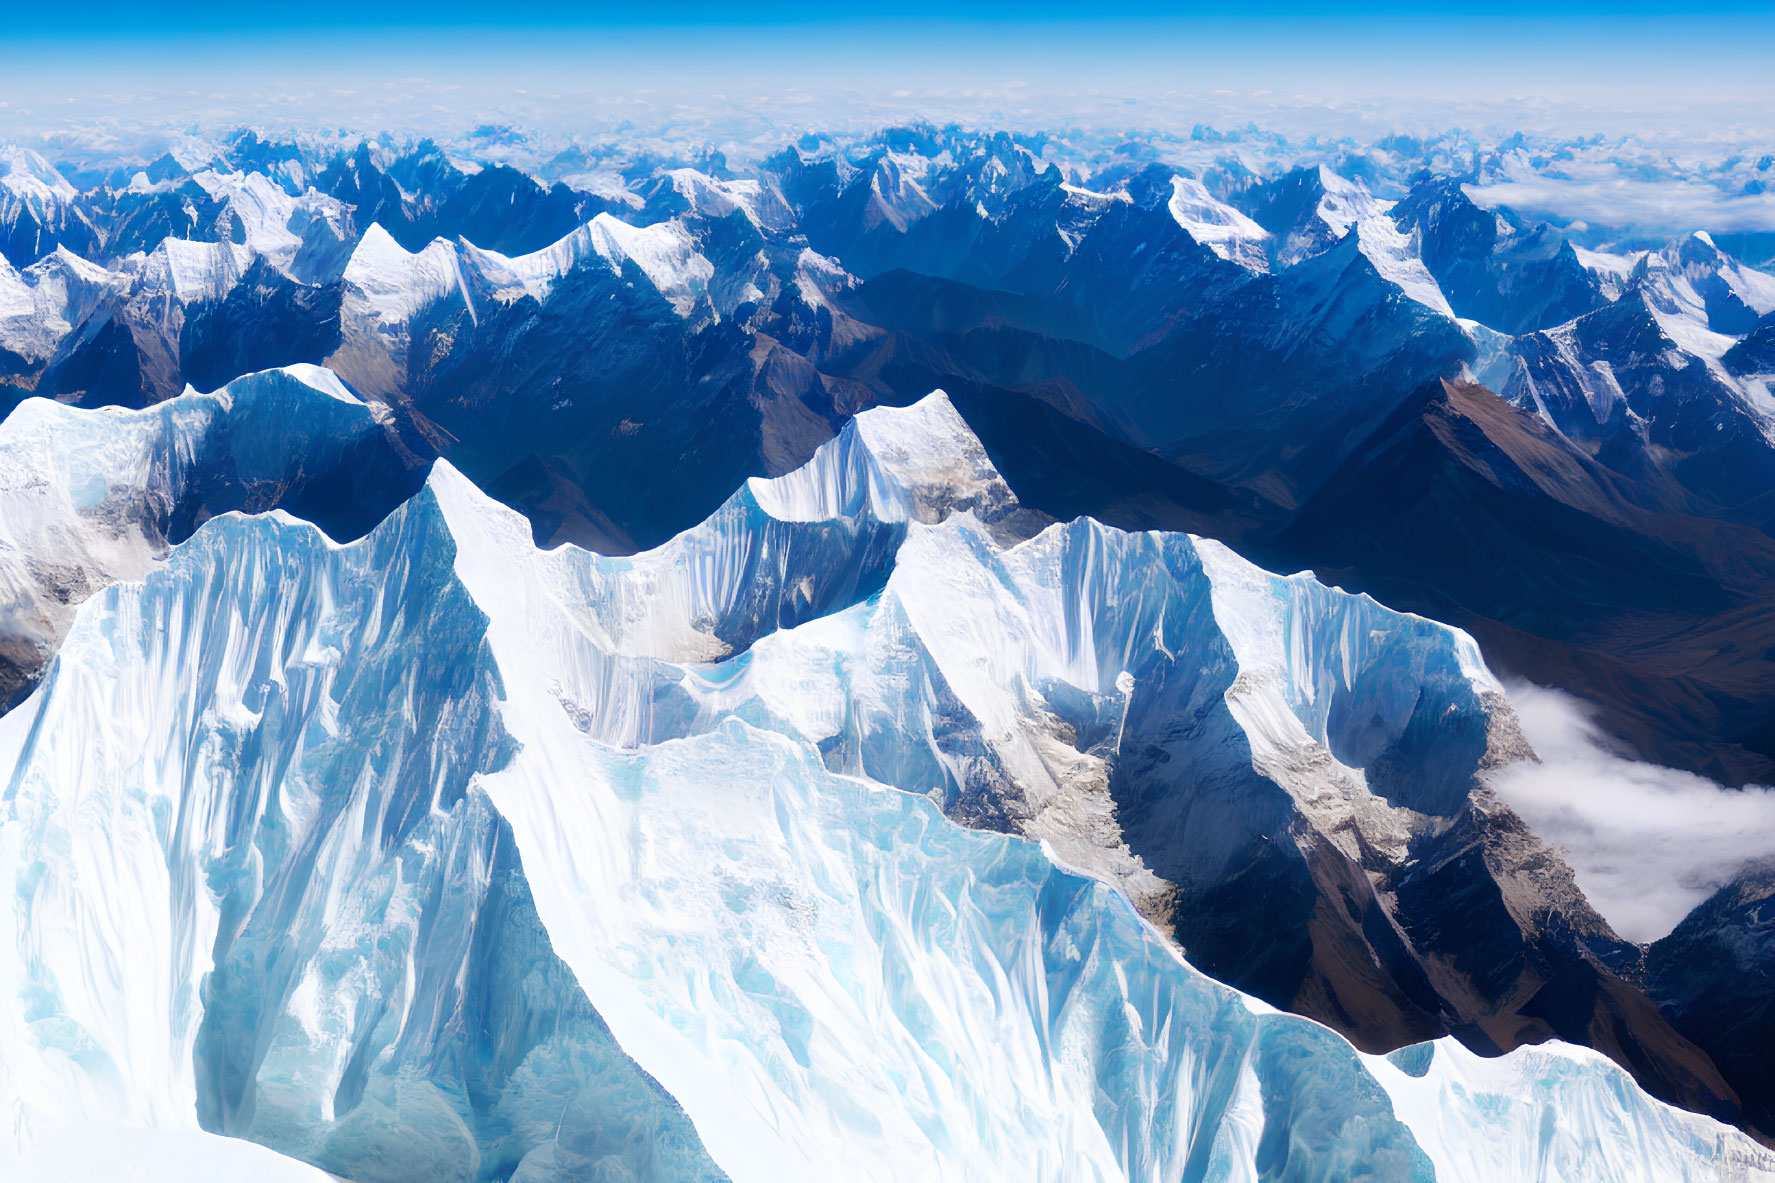 Snow-capped mountain range with glaciers in aerial view